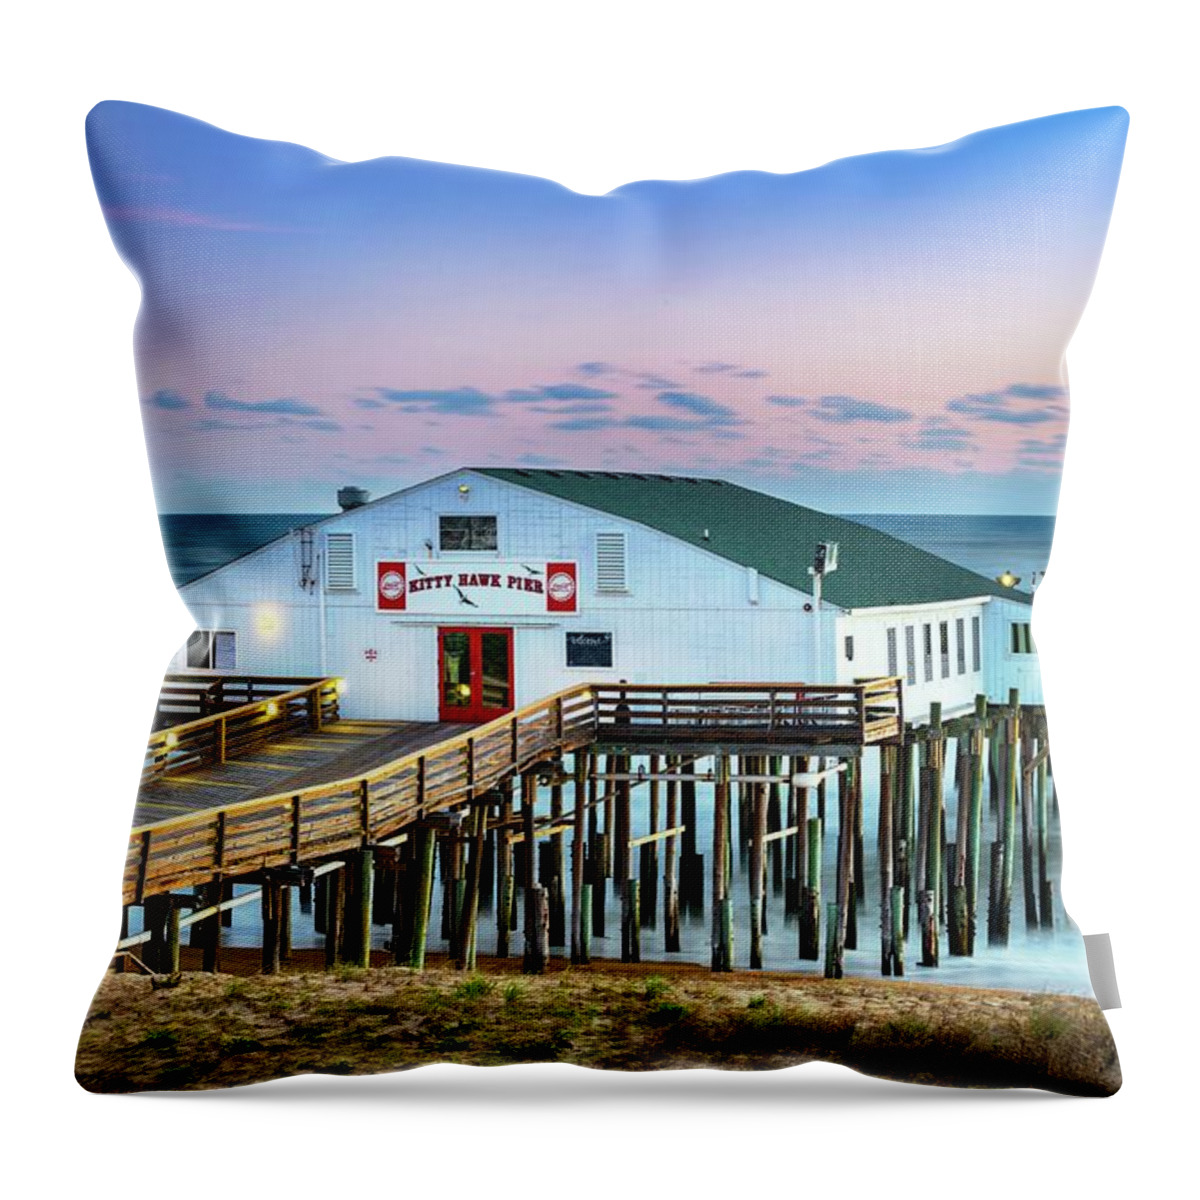 Estock Throw Pillow featuring the digital art Kitty Hawk Pier, Outer Banks, Nc by Laura Zeid